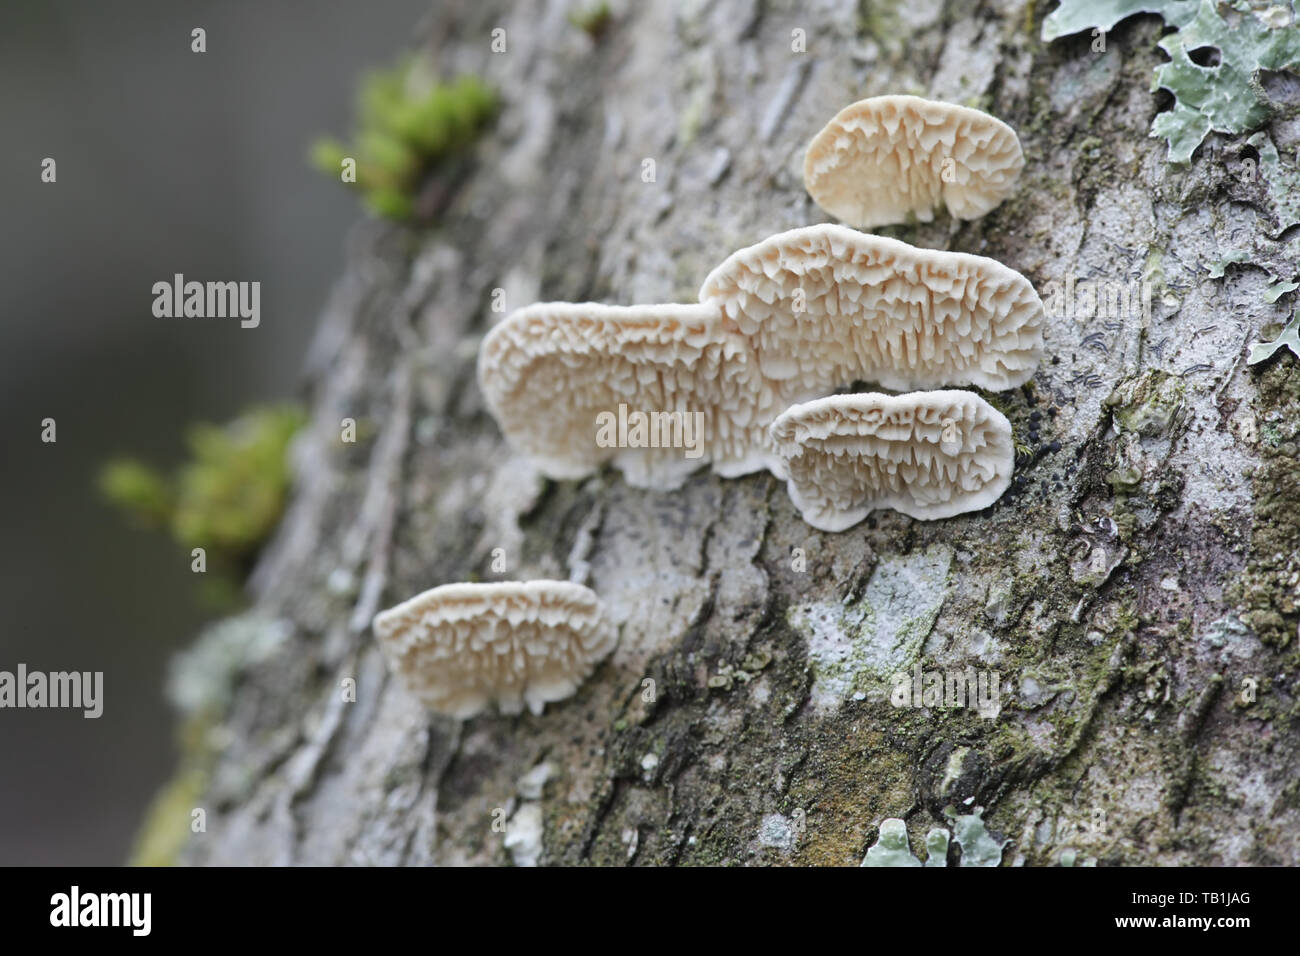 Irpex lacteus, known as the Milk-white Toothed Polypore, studied for biofuel production Stock Photo